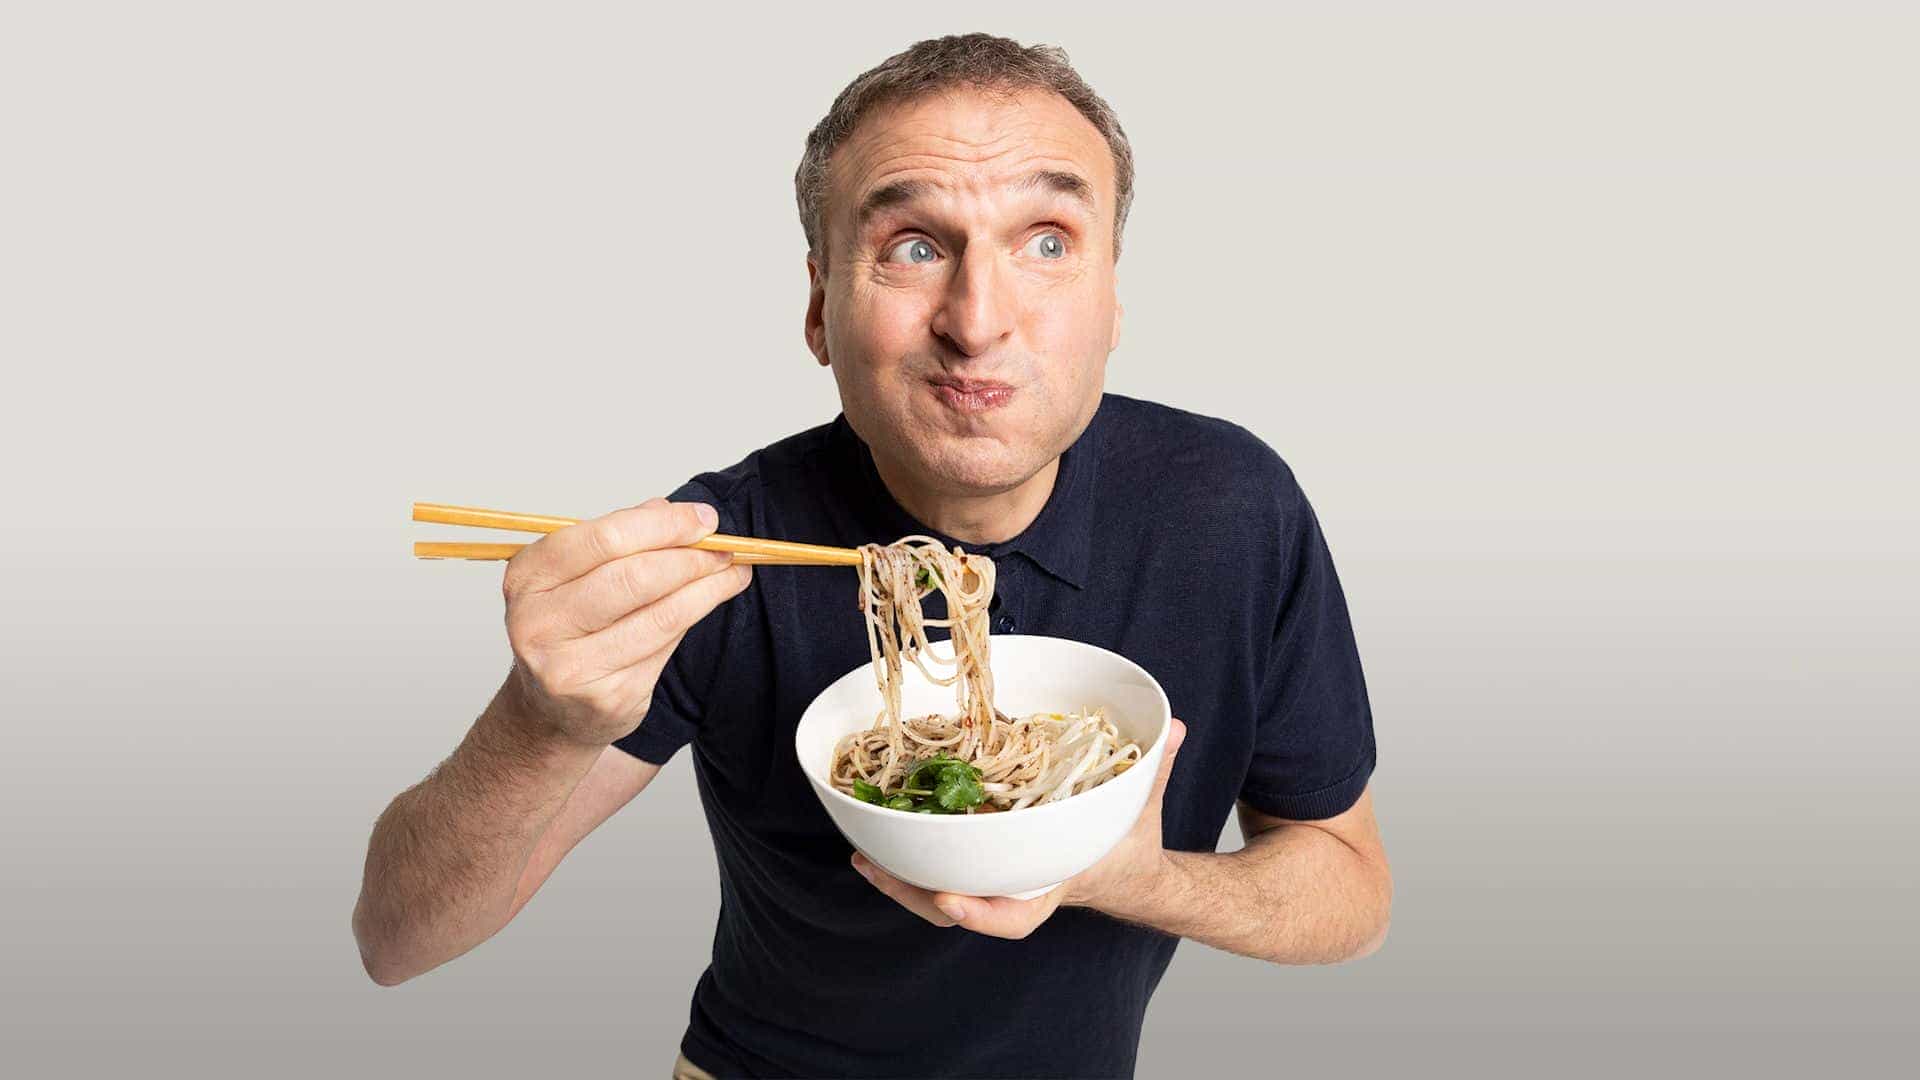 An Evening with Phil Rosenthal - Somebody Feed Phil Book Tour